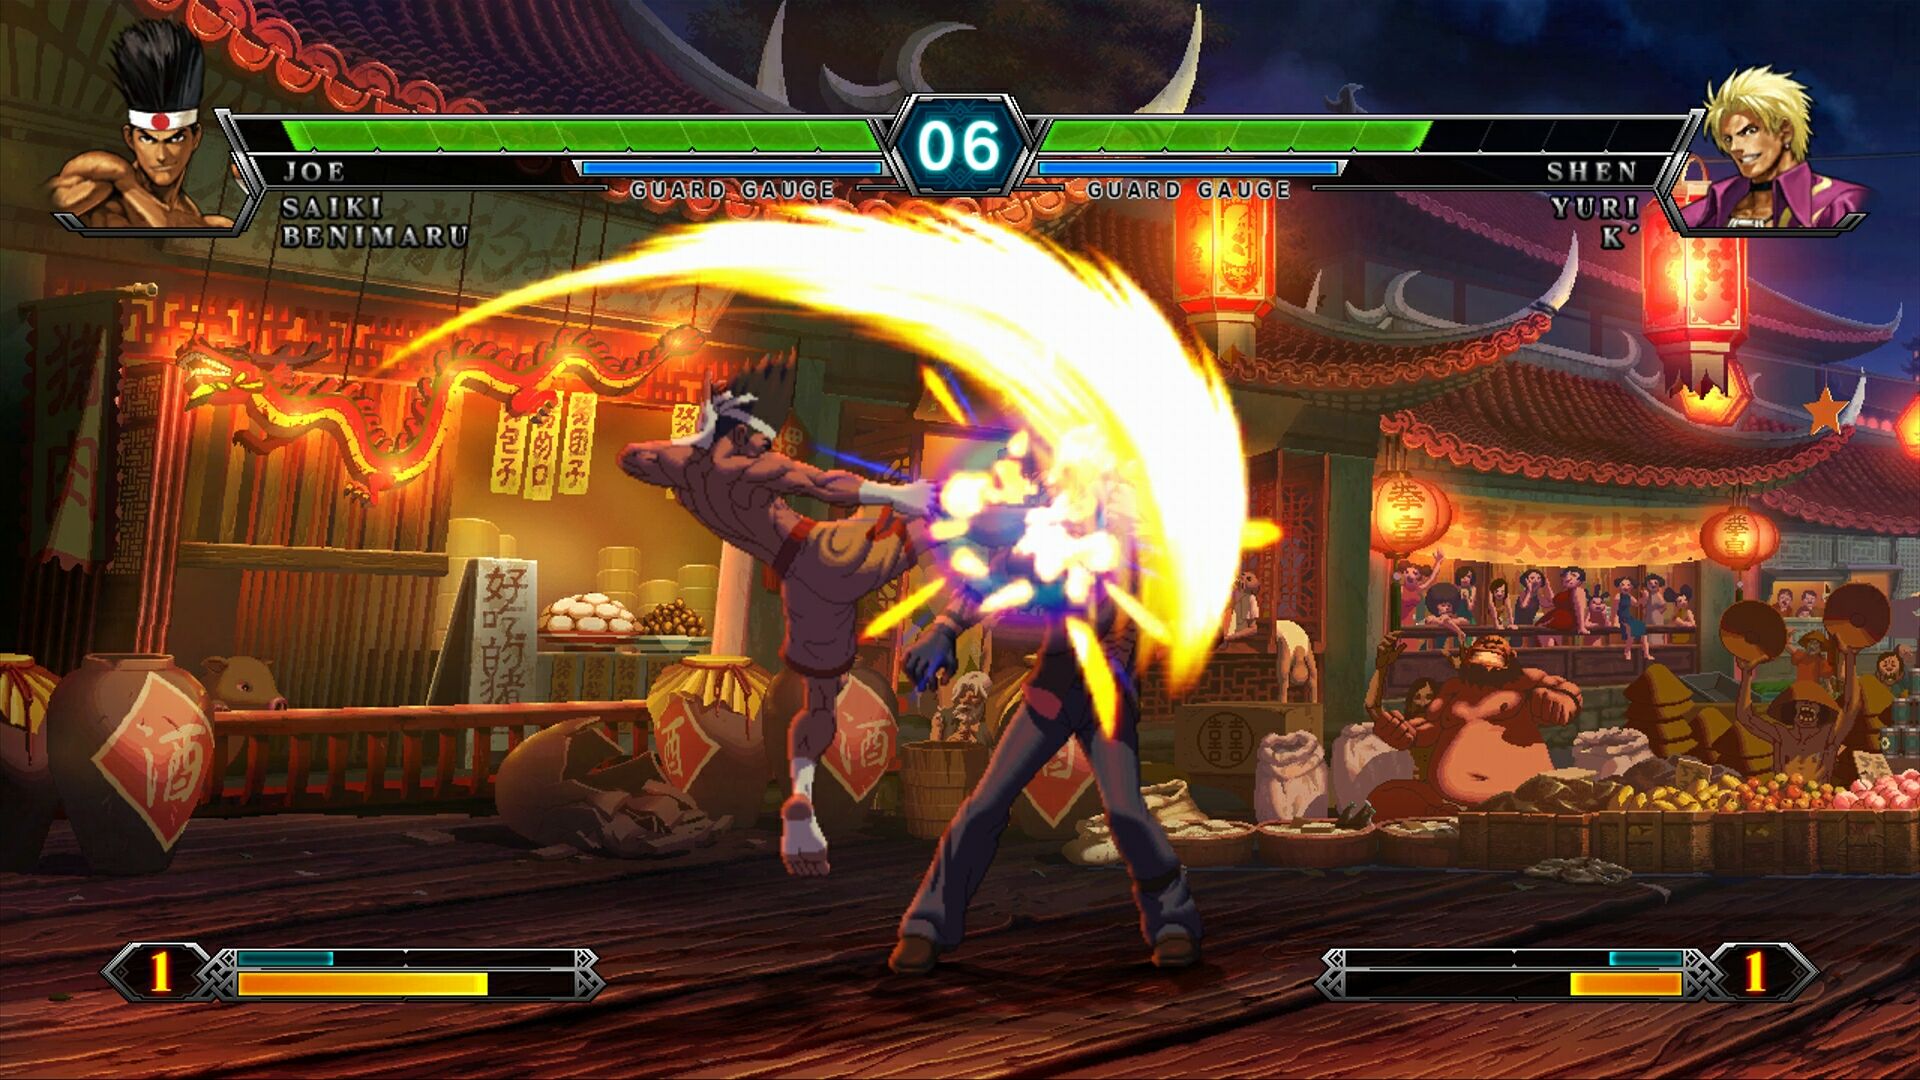 The King of Fighters XIII is a 2D tag-team fighting game developed and rele...